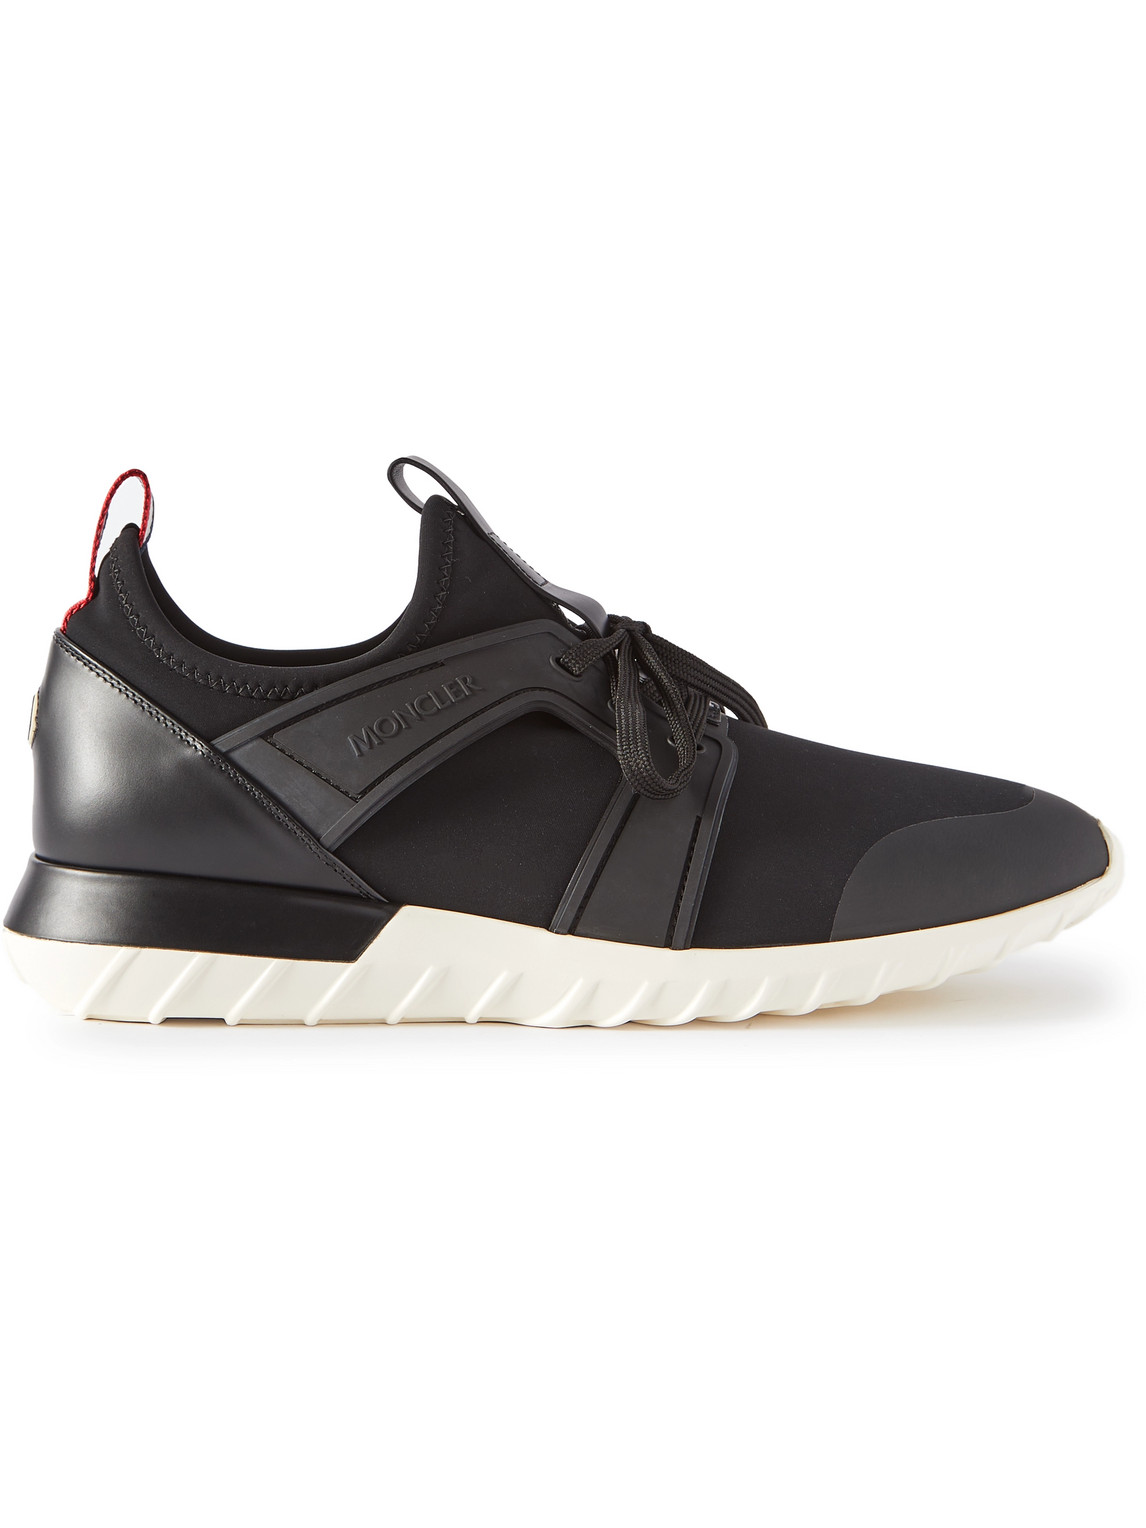 Moncler Emilien Rubber And Leather-trimmed Neoprene Sneakers In Black